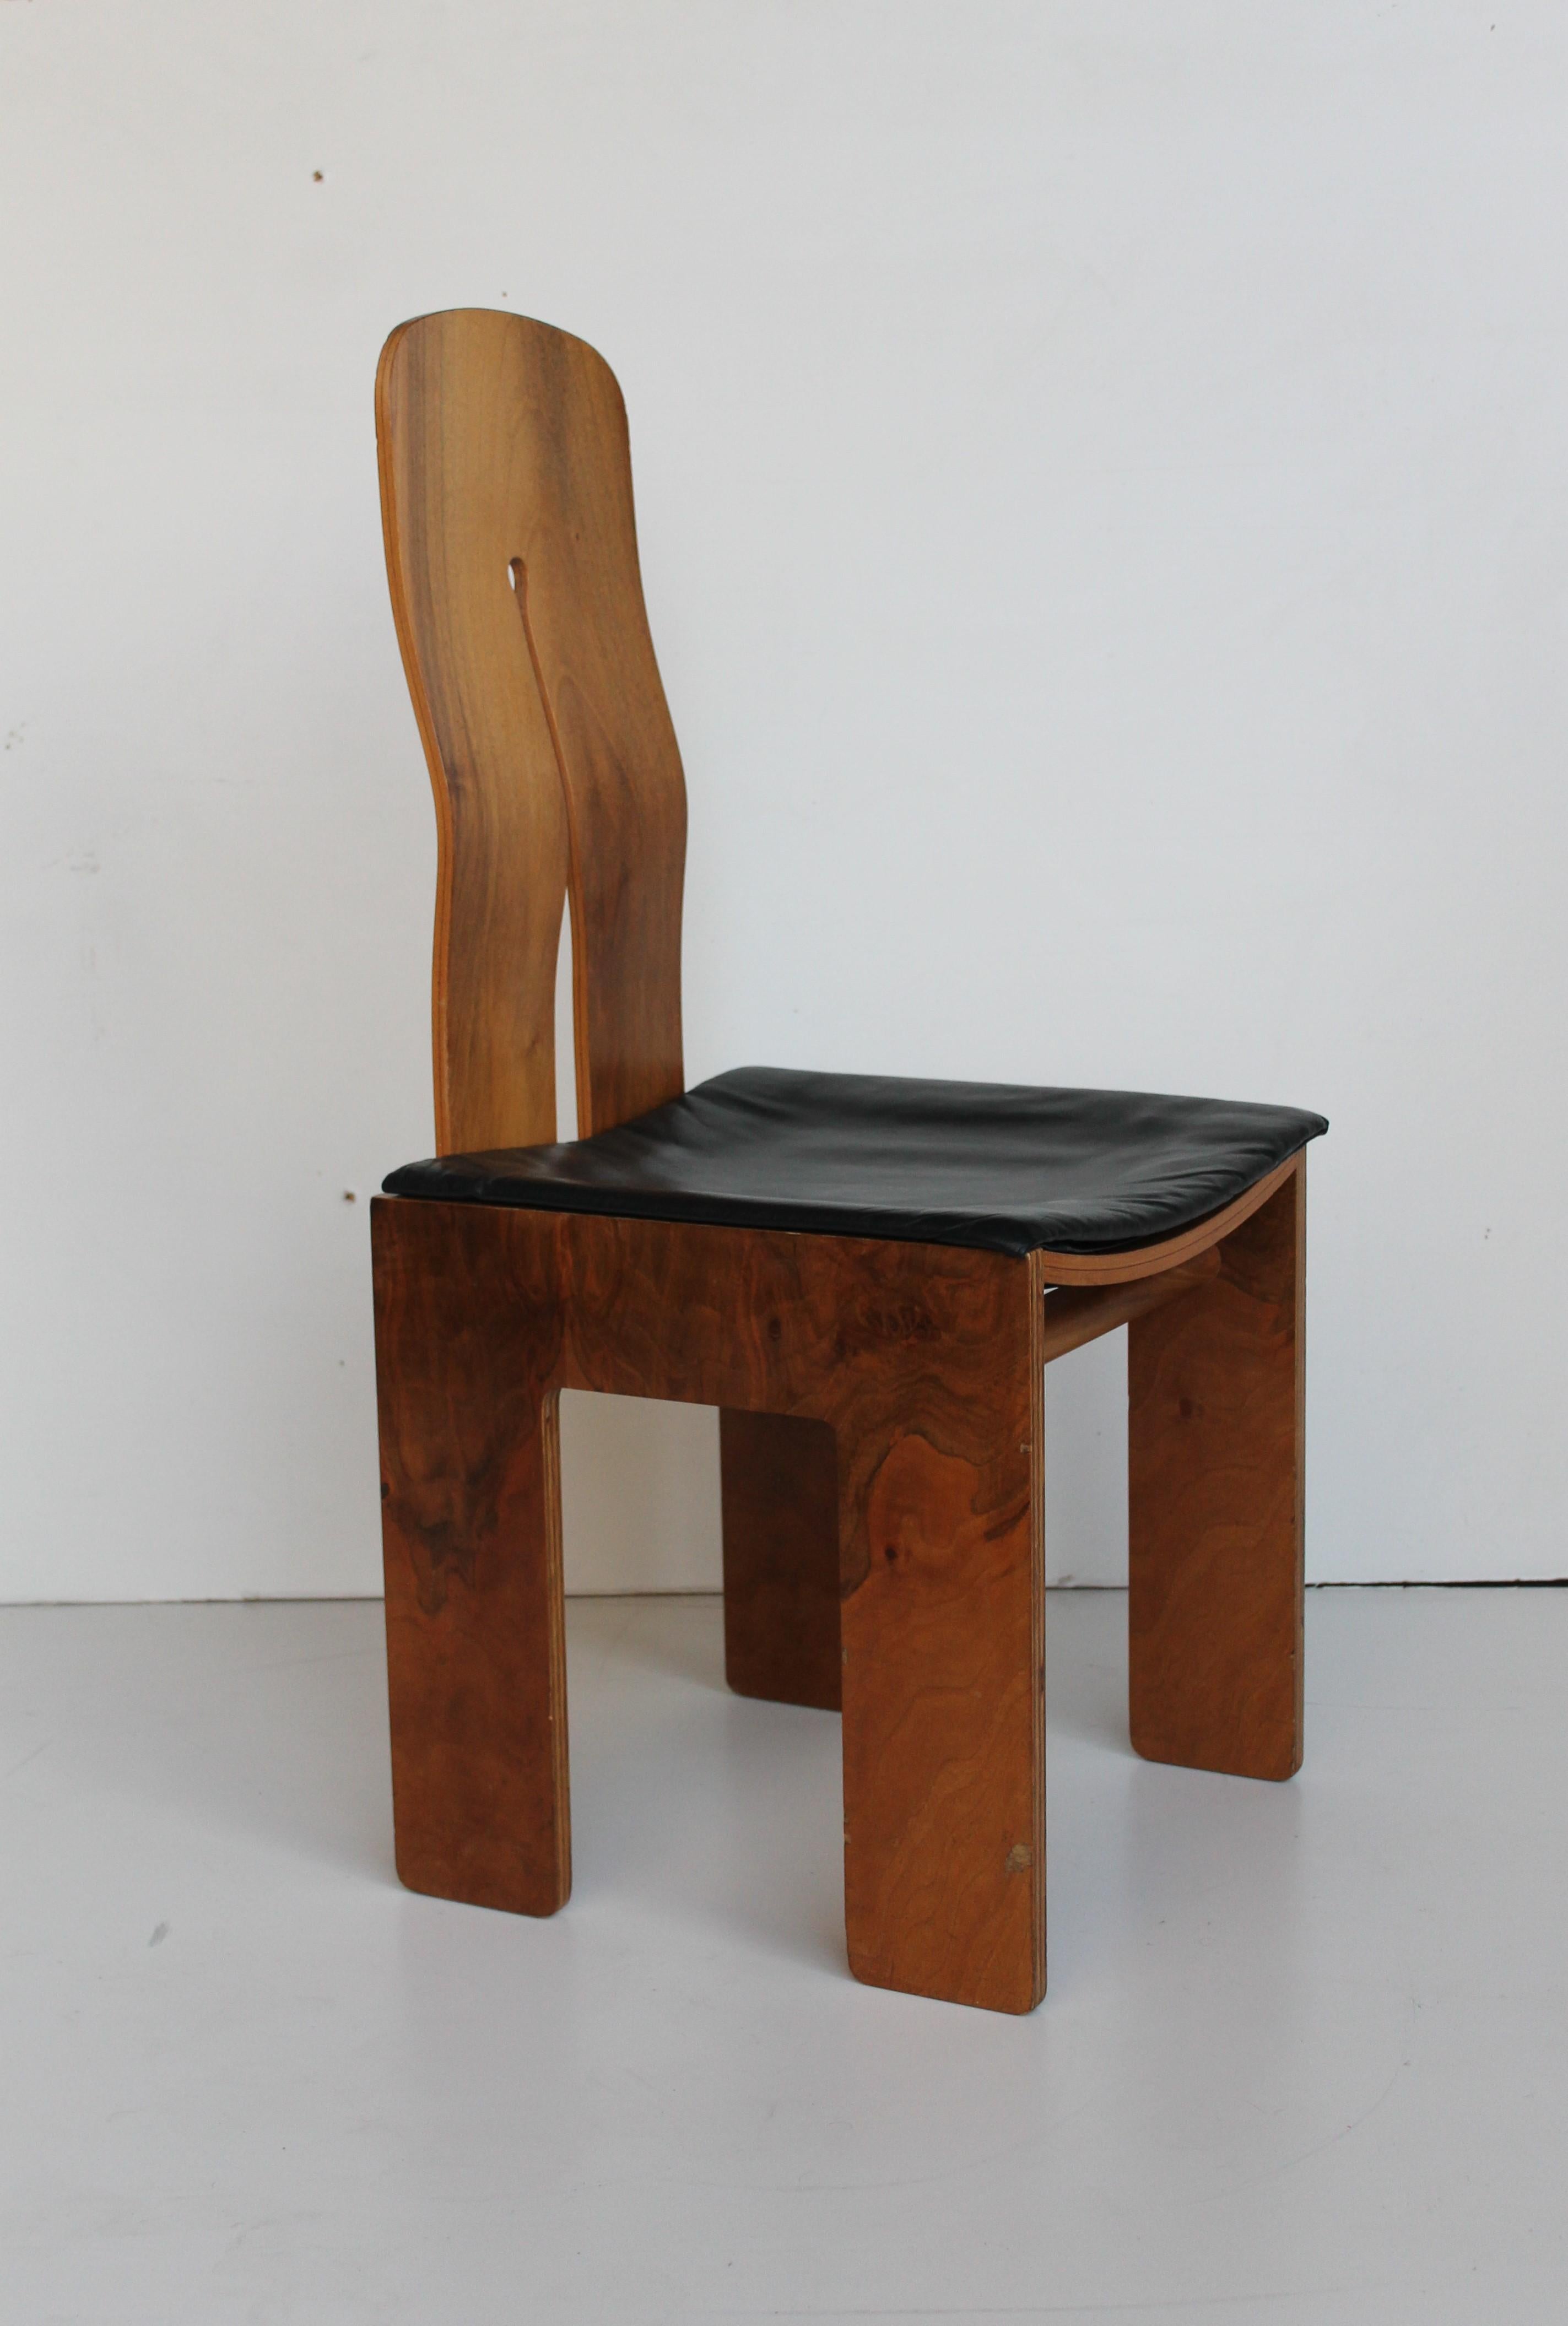 Carlo Scarpa walnut and black leather chairs mod. 1934/765 for Bernini, 1977.


765 is planned by Carlo Scarpa in 1934, year from which the chair will take subsequently the name, but it will be produced only in the 1977.

The author realizes